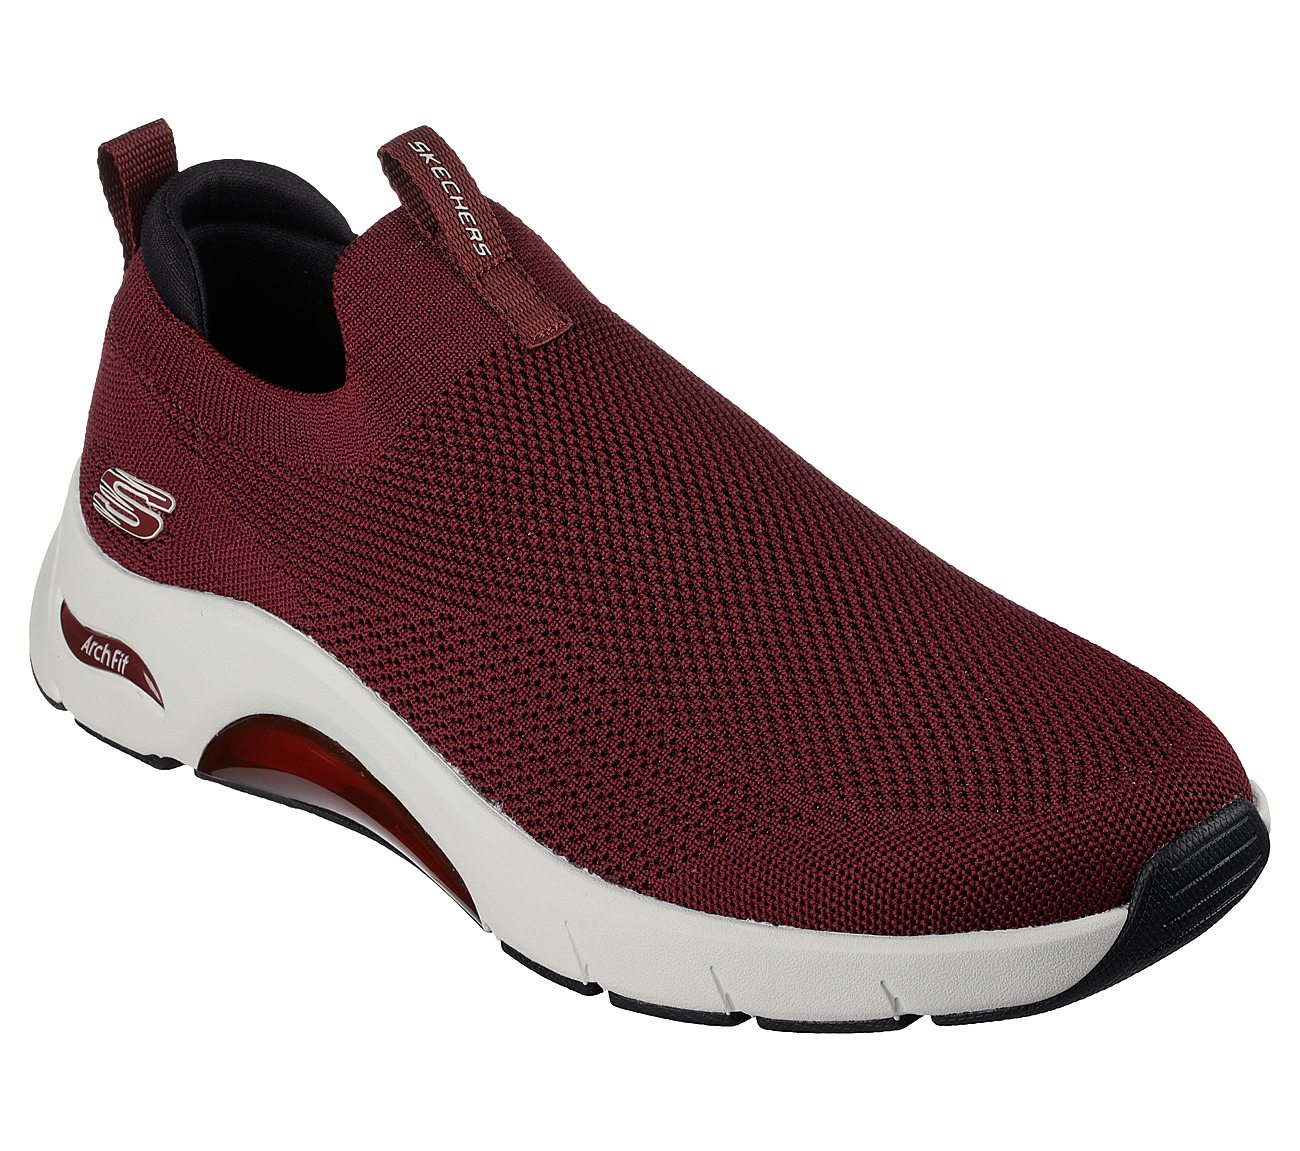 SKECH-AIR ARCH FIT, BBURGUNDY Footwear Right View